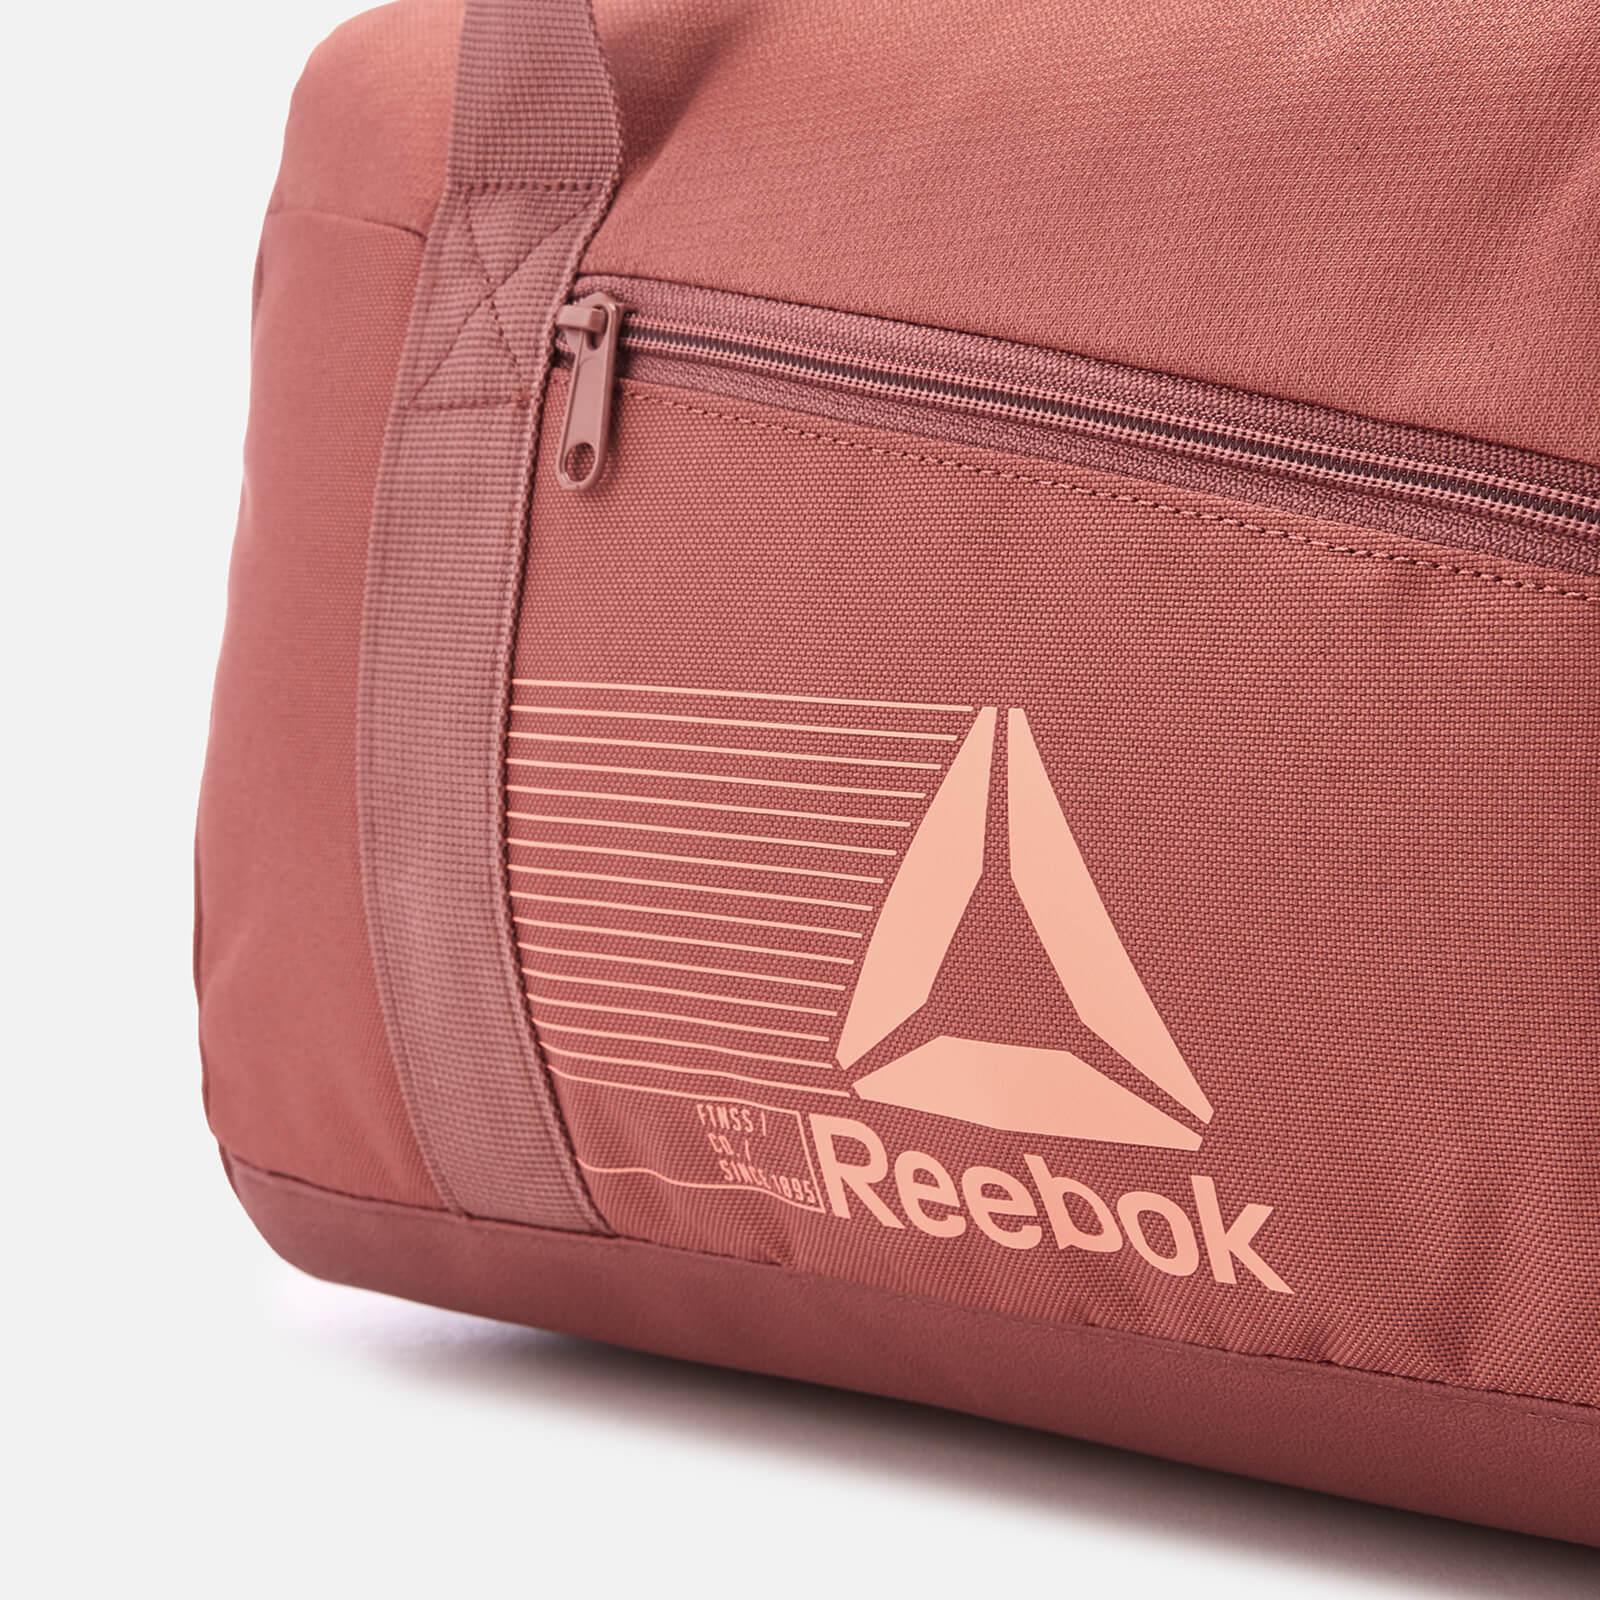 Reebok Active Foundation Small Grip Bag in Red for Men - Lyst